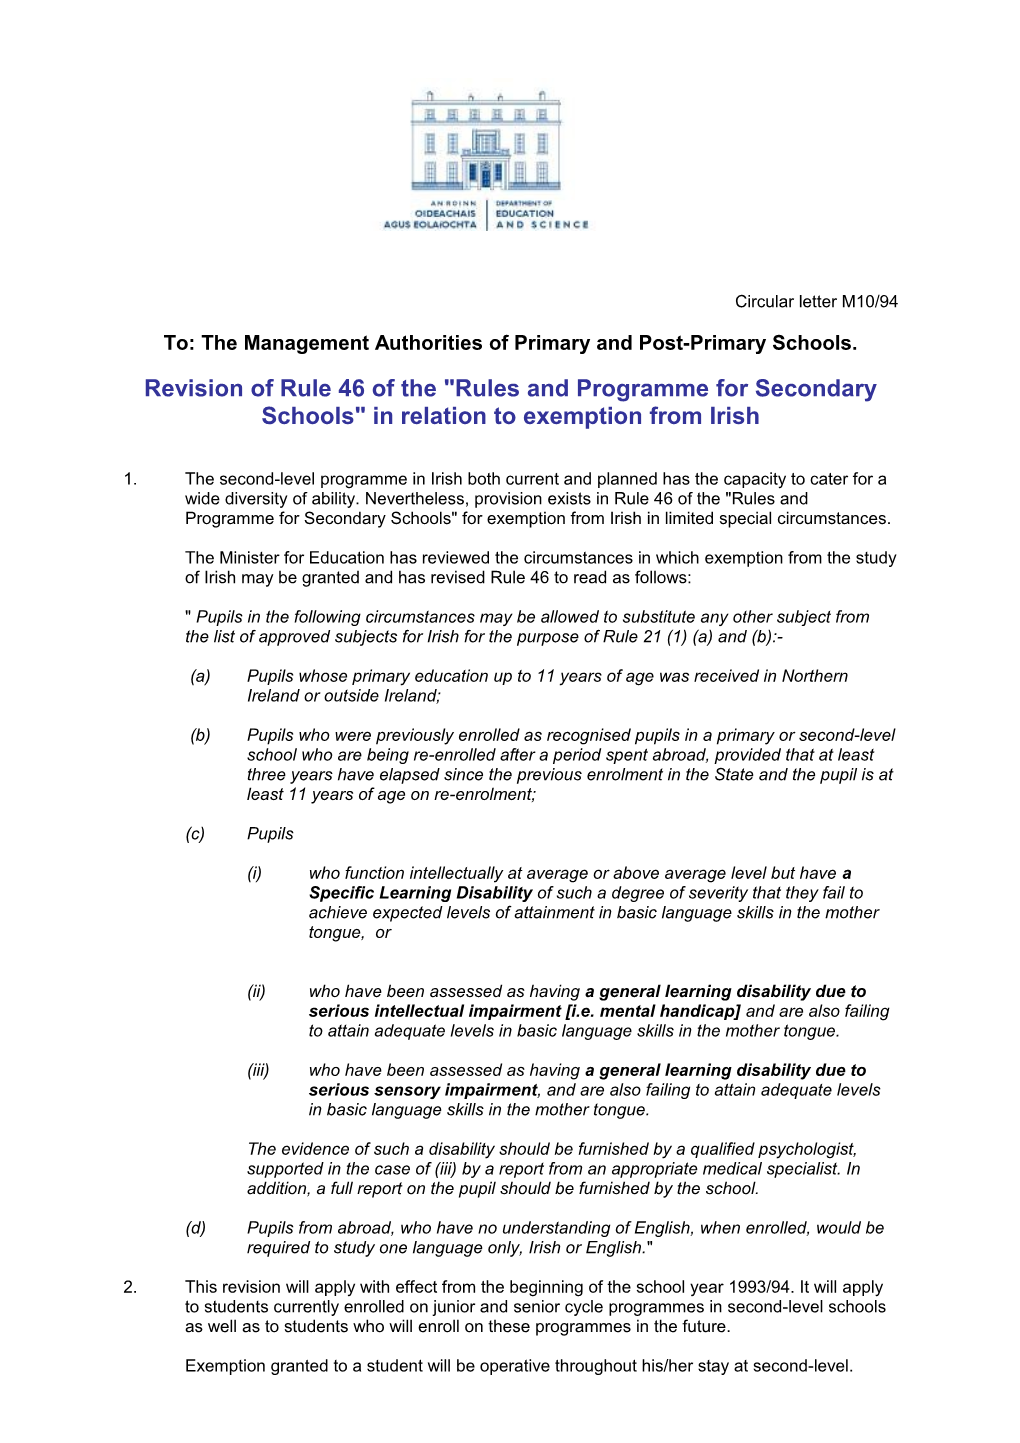 Post Primary Circular M10/94 Revision of Rule 46 of the Rules and Programme for Secondary